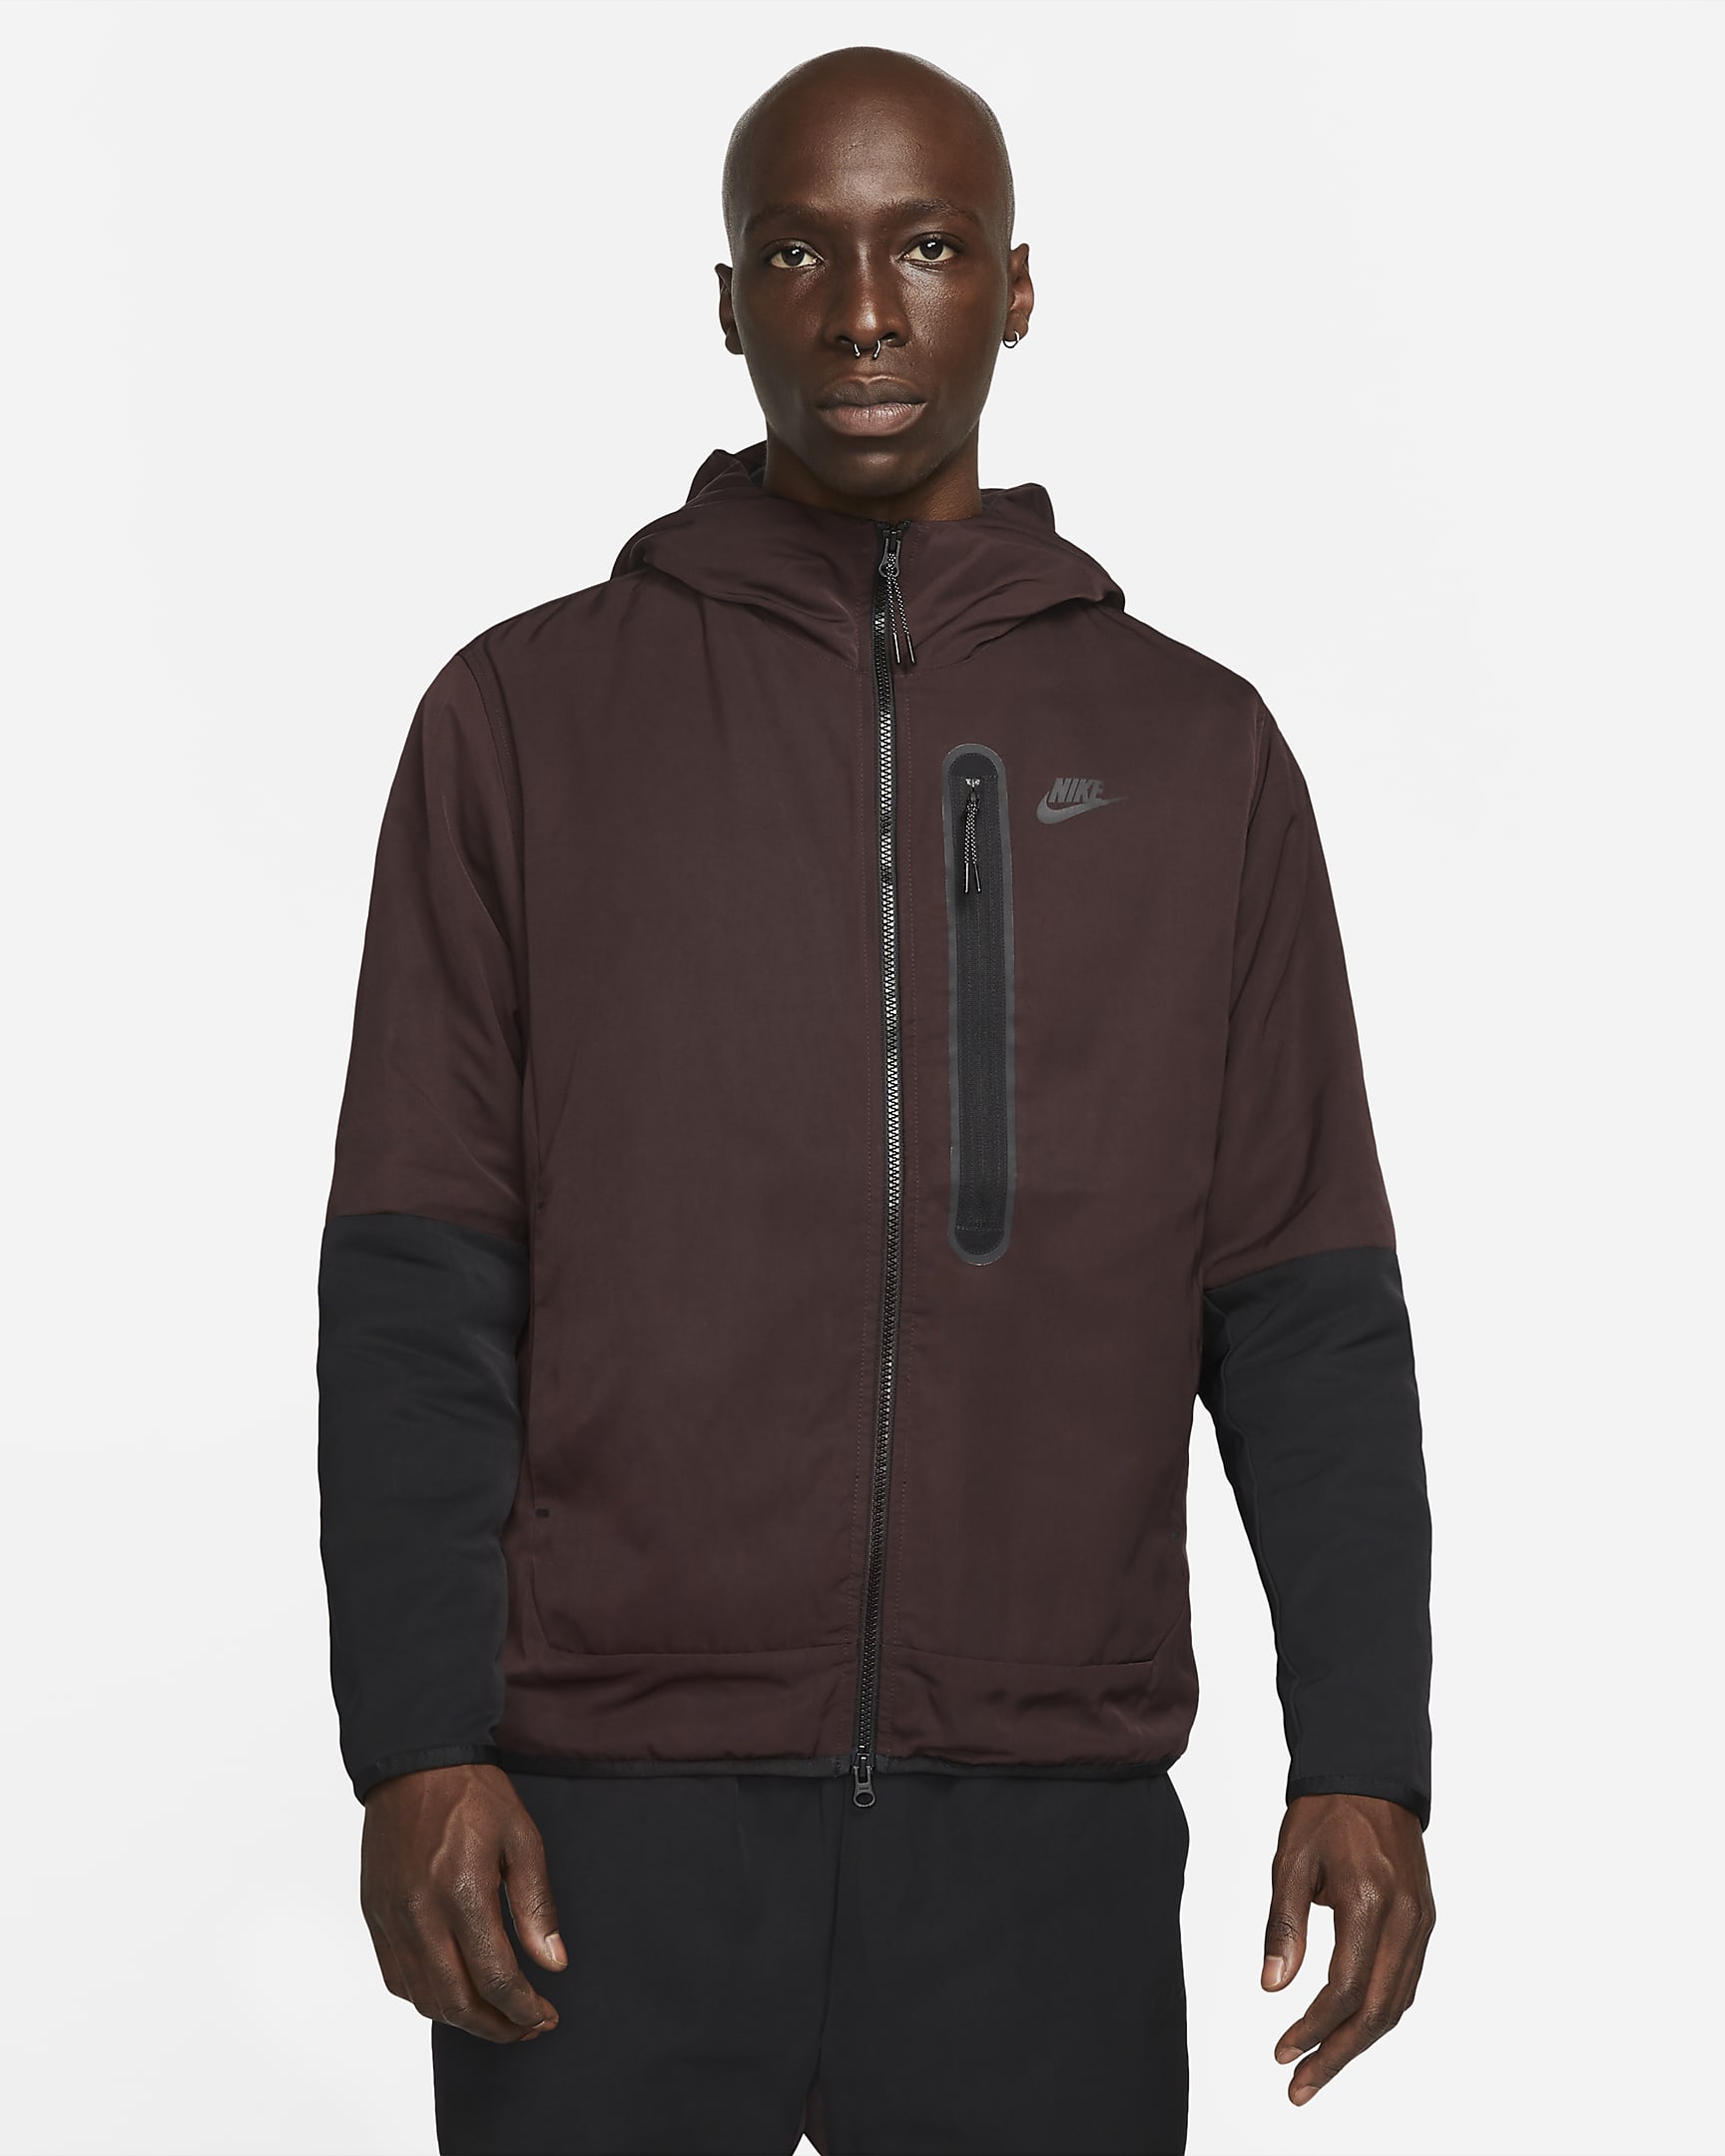 nike-sportswear-tech-essentials-mens-repel-insulated-hooded-jacket-Q0FT64.png